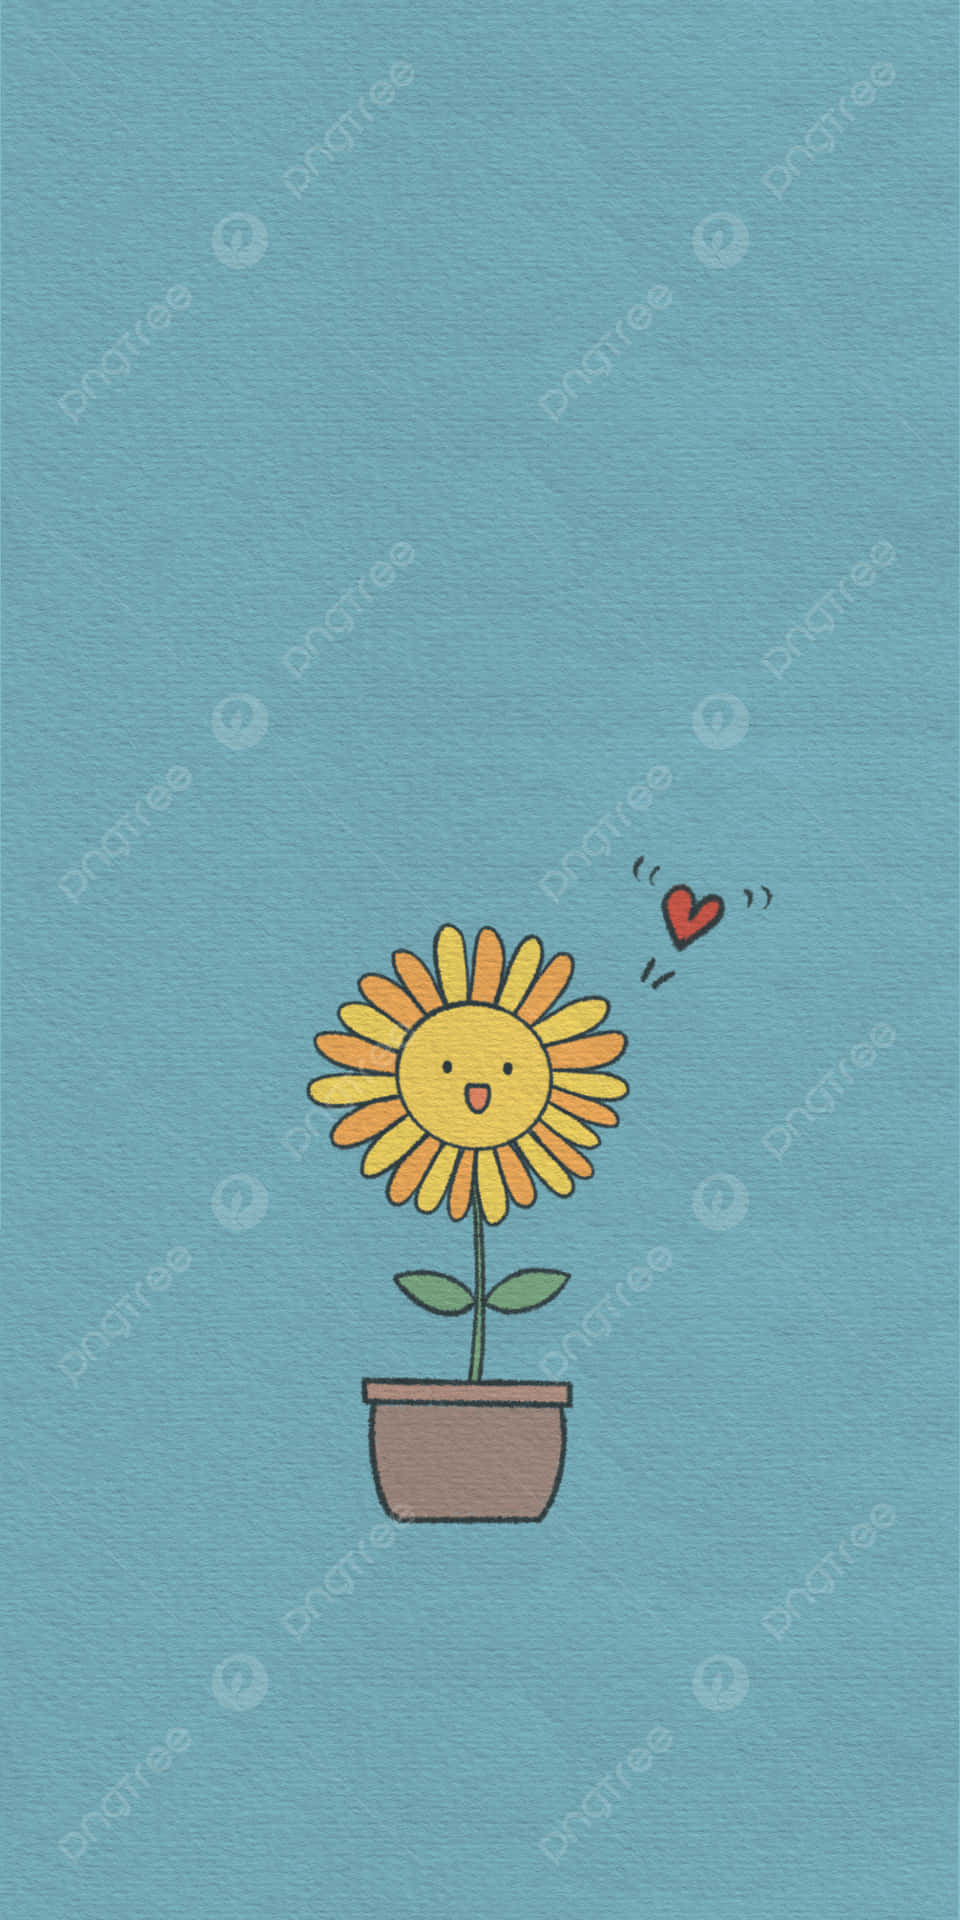 Brighten up your day with this adorable Cute Sun! Wallpaper